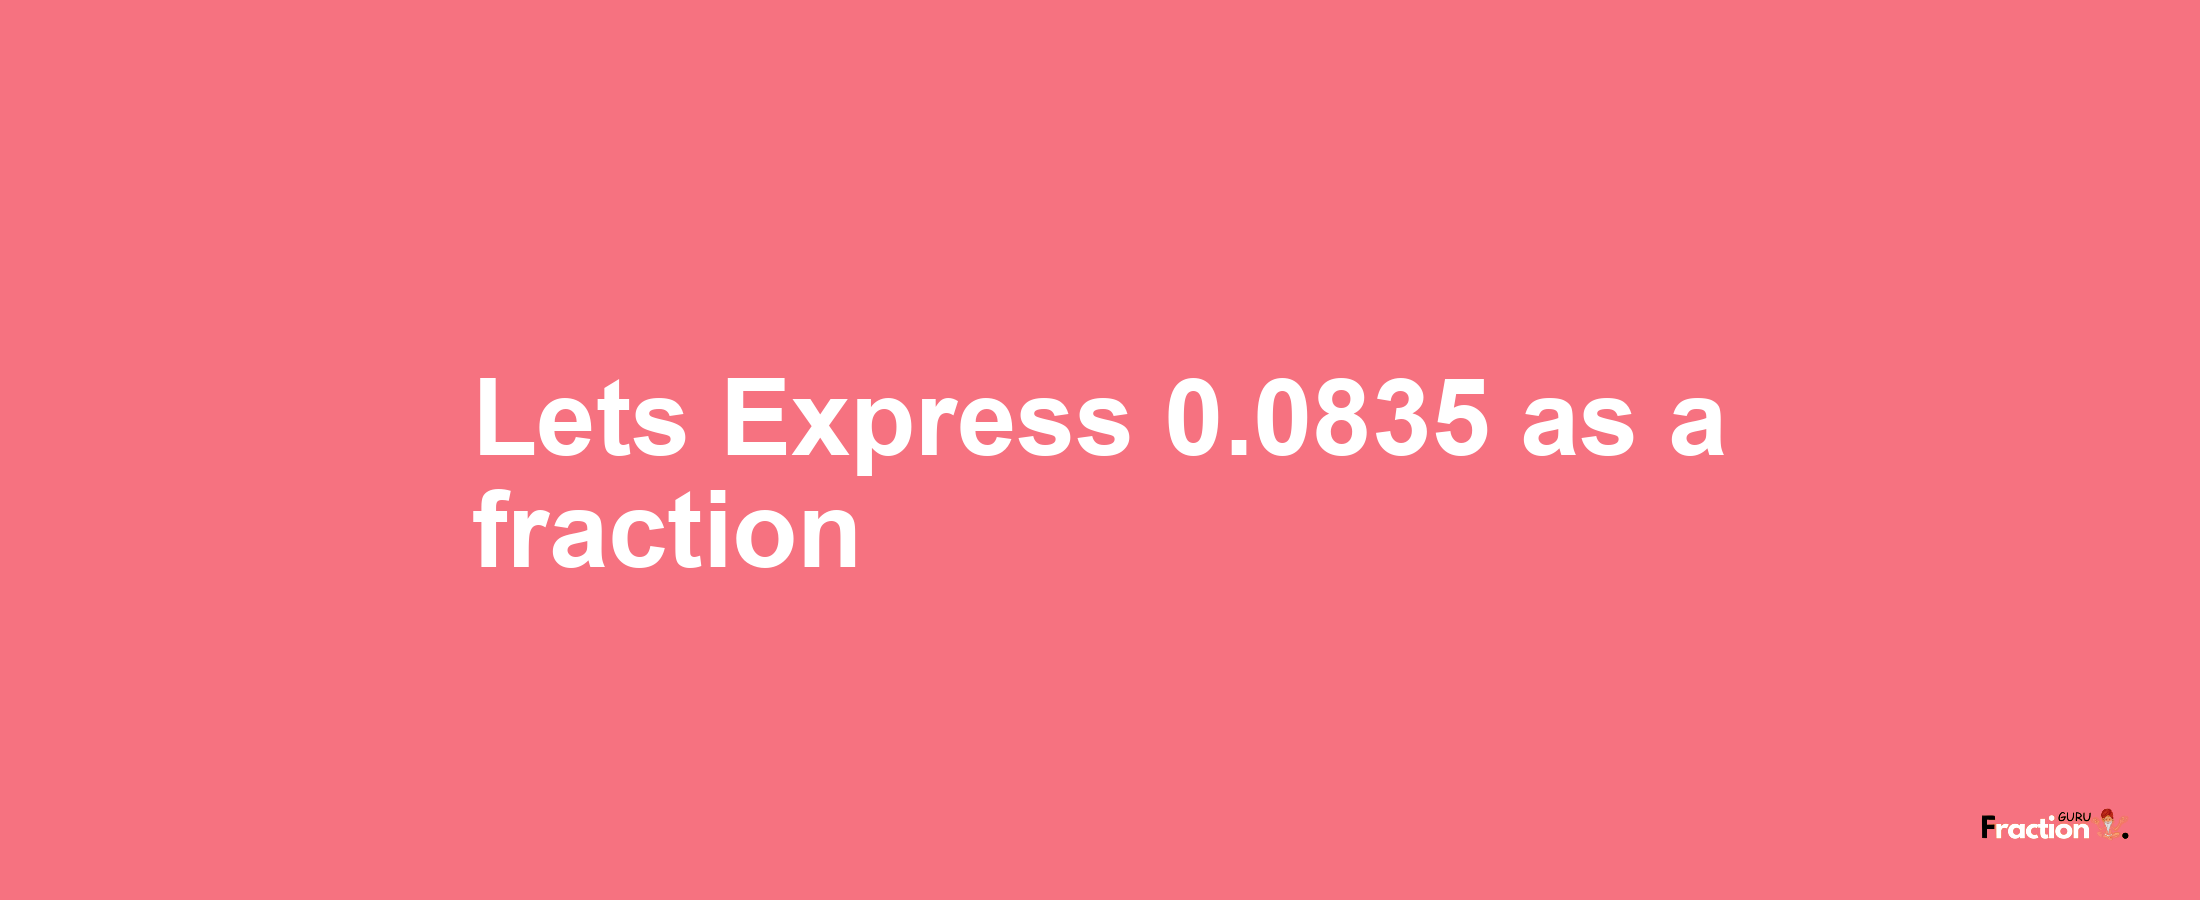 Lets Express 0.0835 as afraction